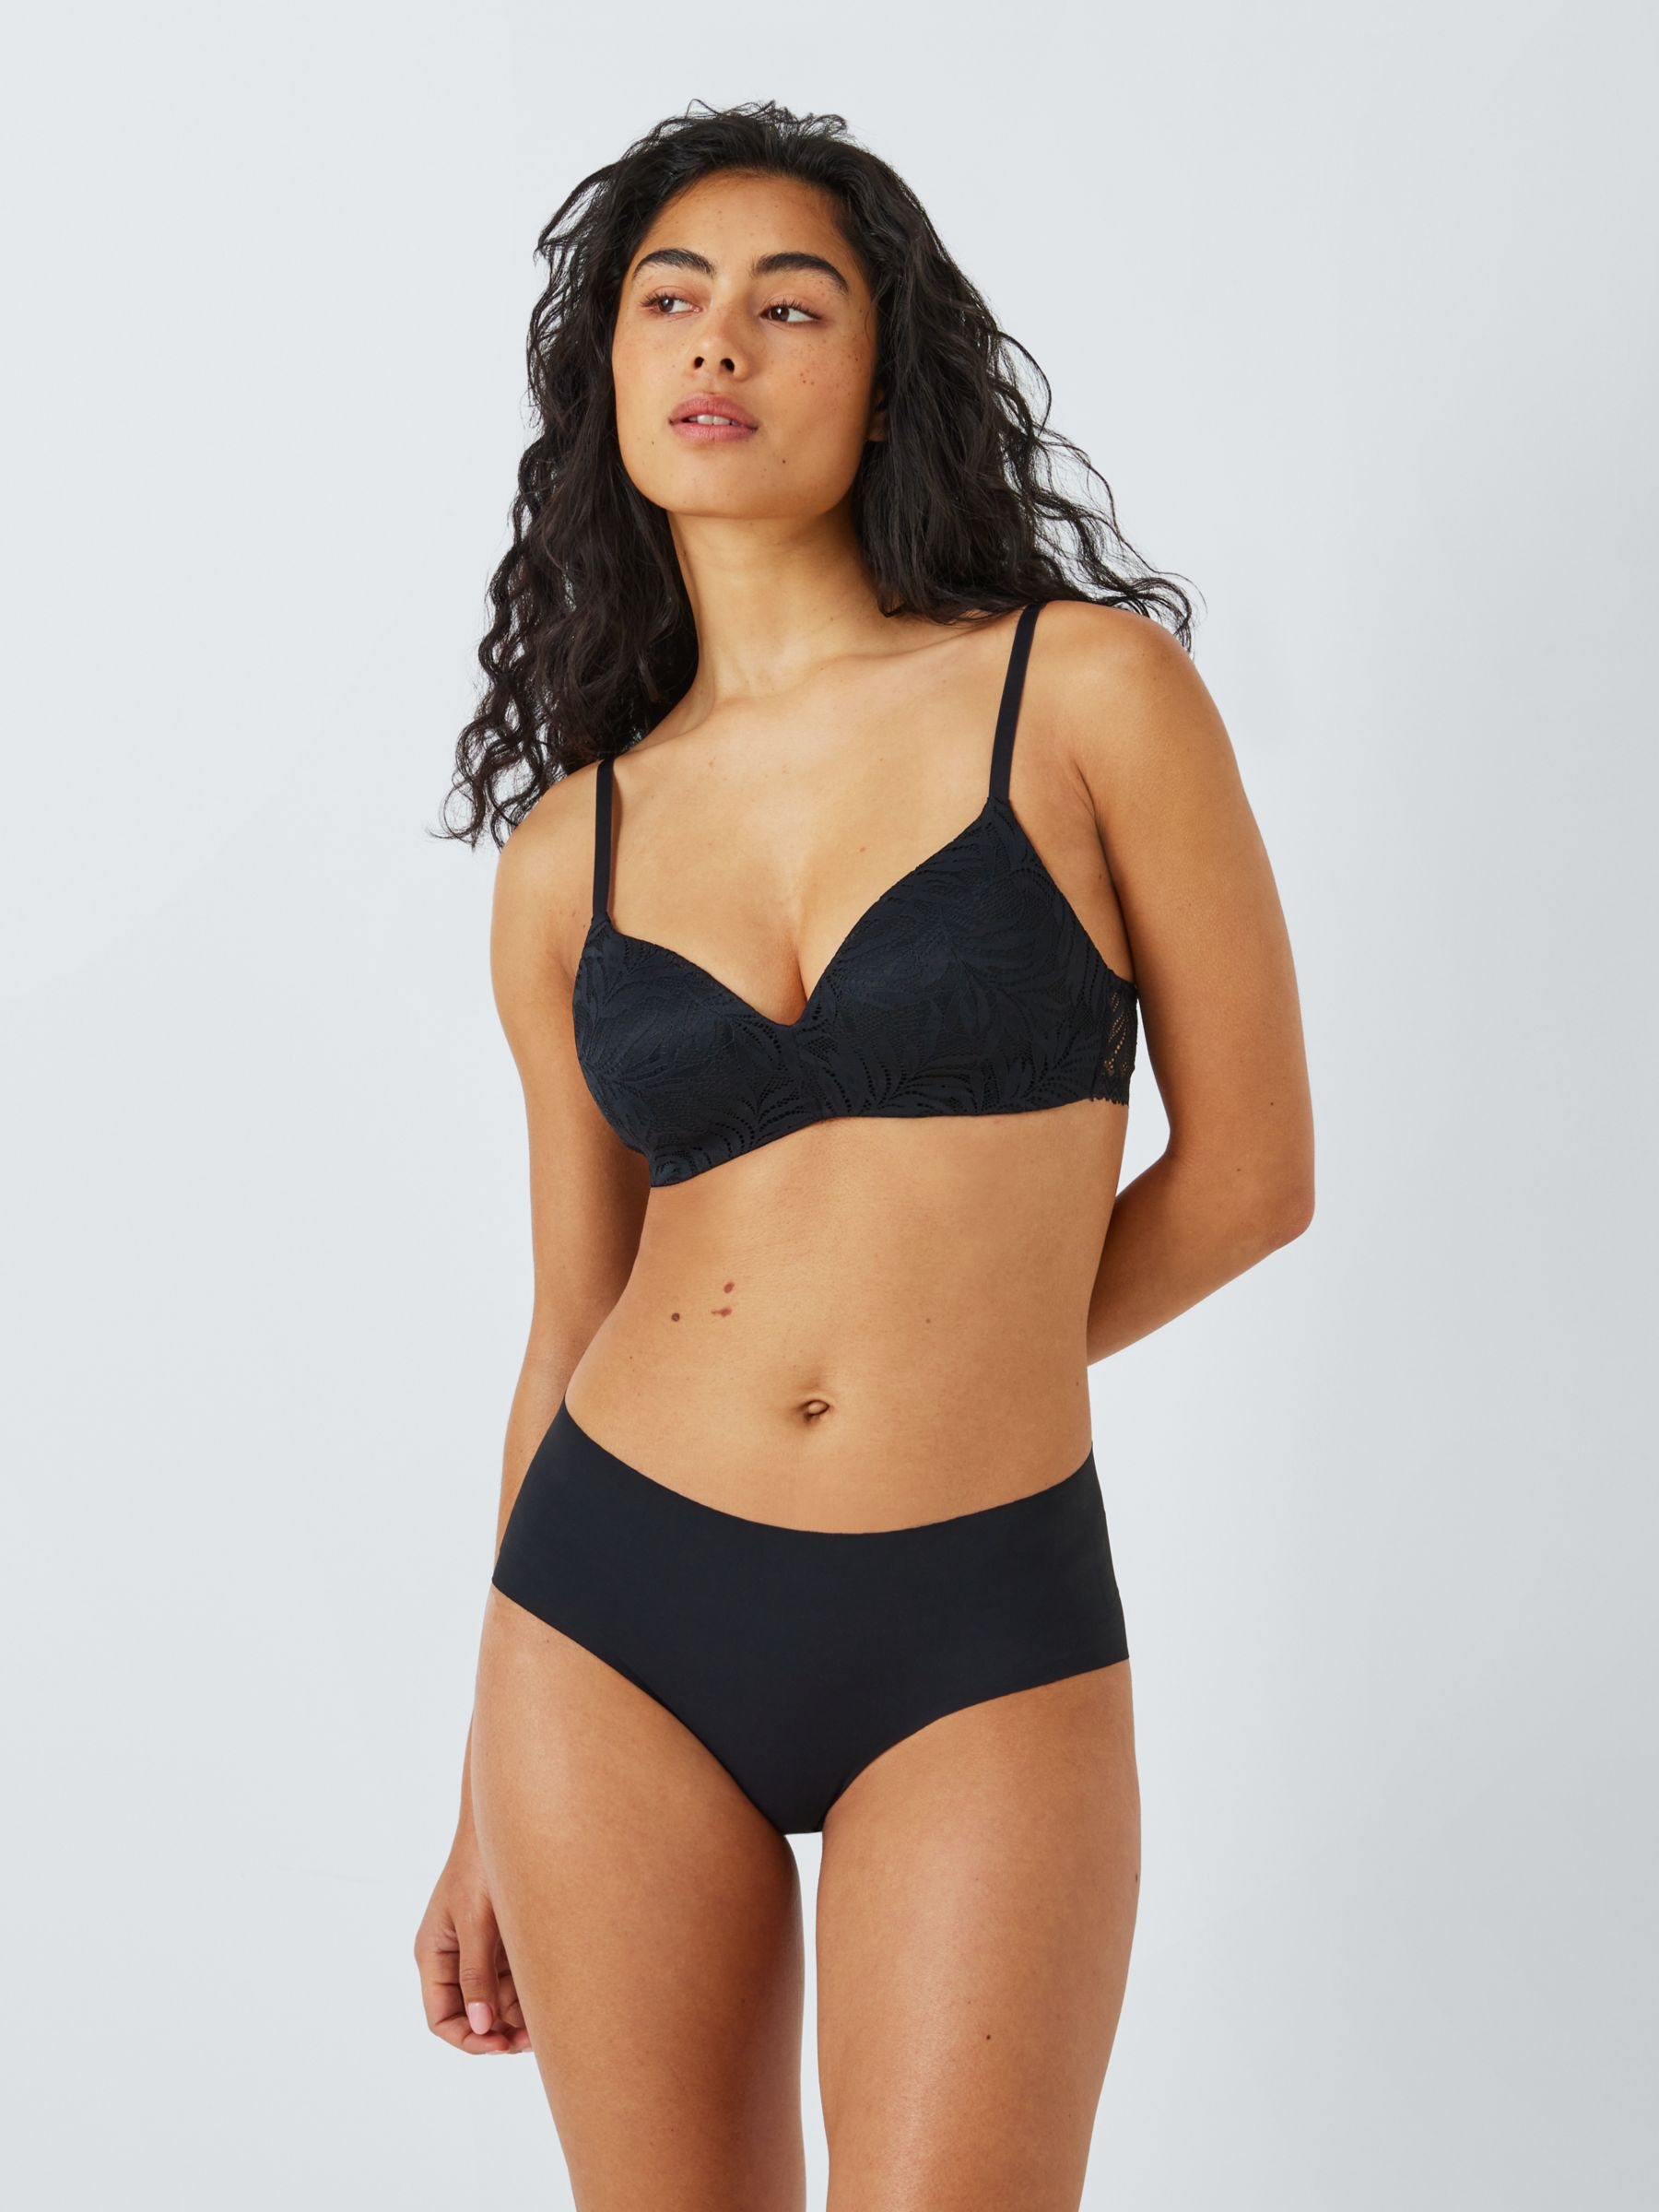 John Lewis ANYDAY Avery Non-Wired Lace Bra, Black at John Lewis & Partners